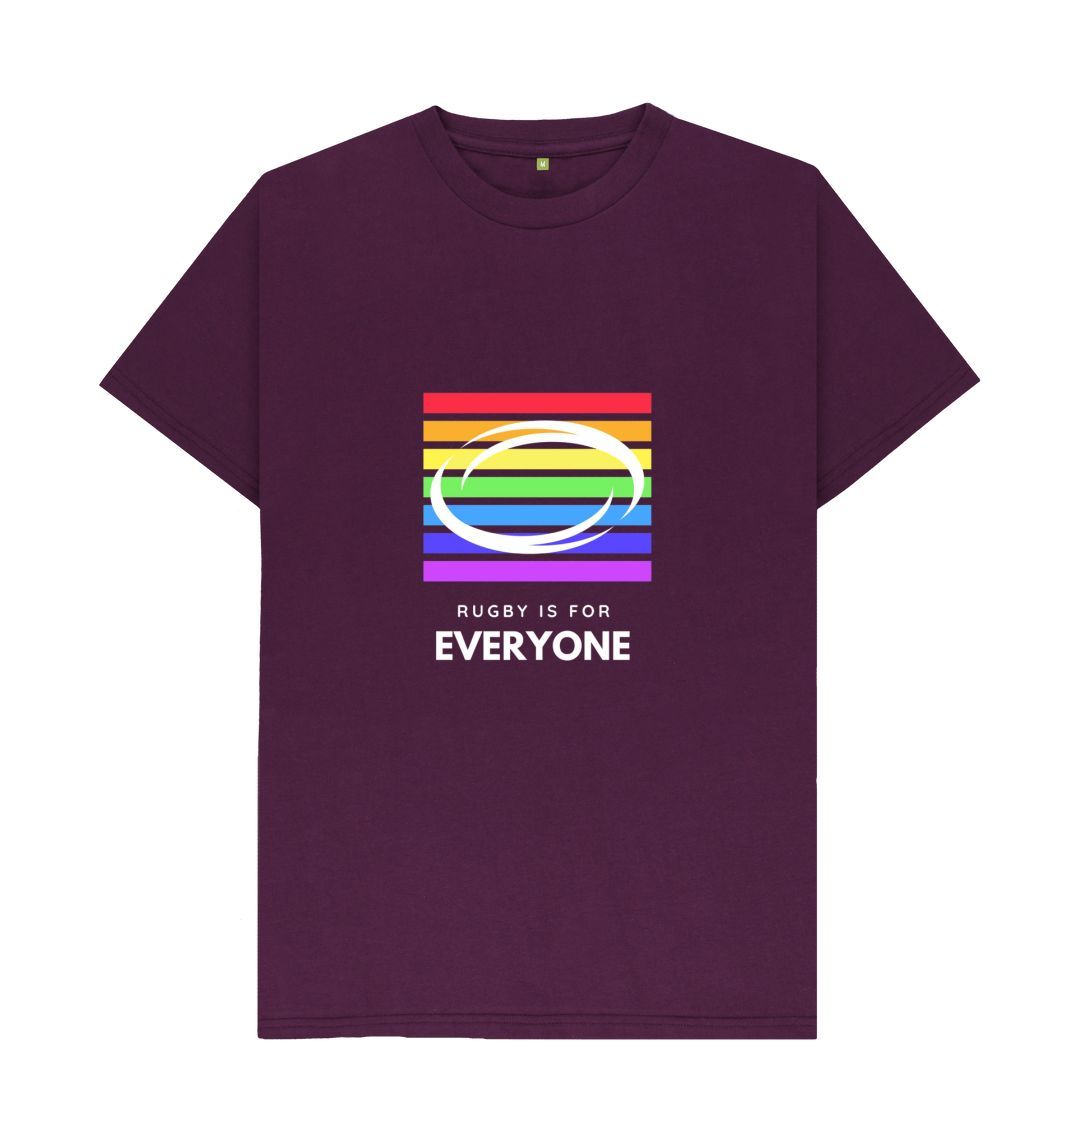 Purple Adults T-Shirt - Rugby is for everyone